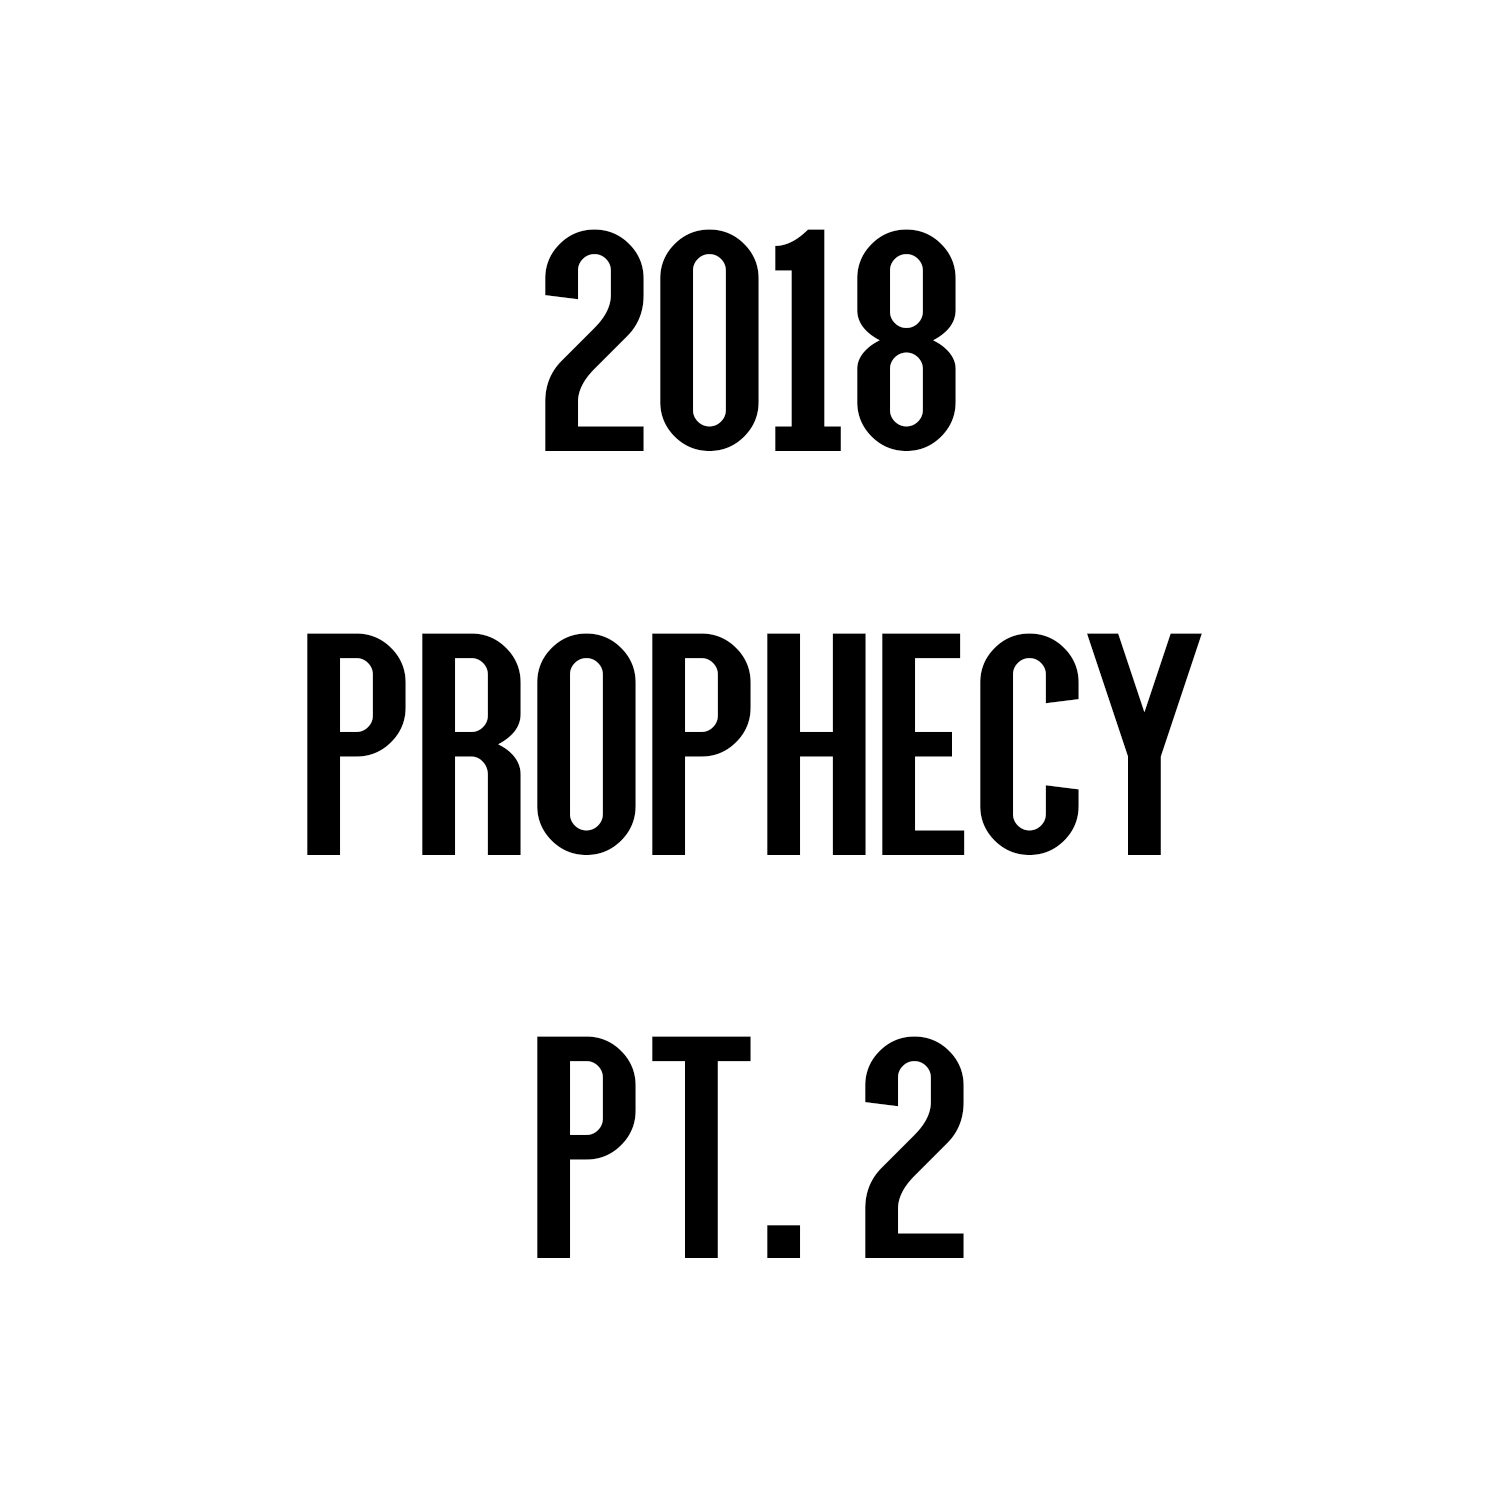 Johnny’s Prophetic Word for the New Year | Part 2 of 4